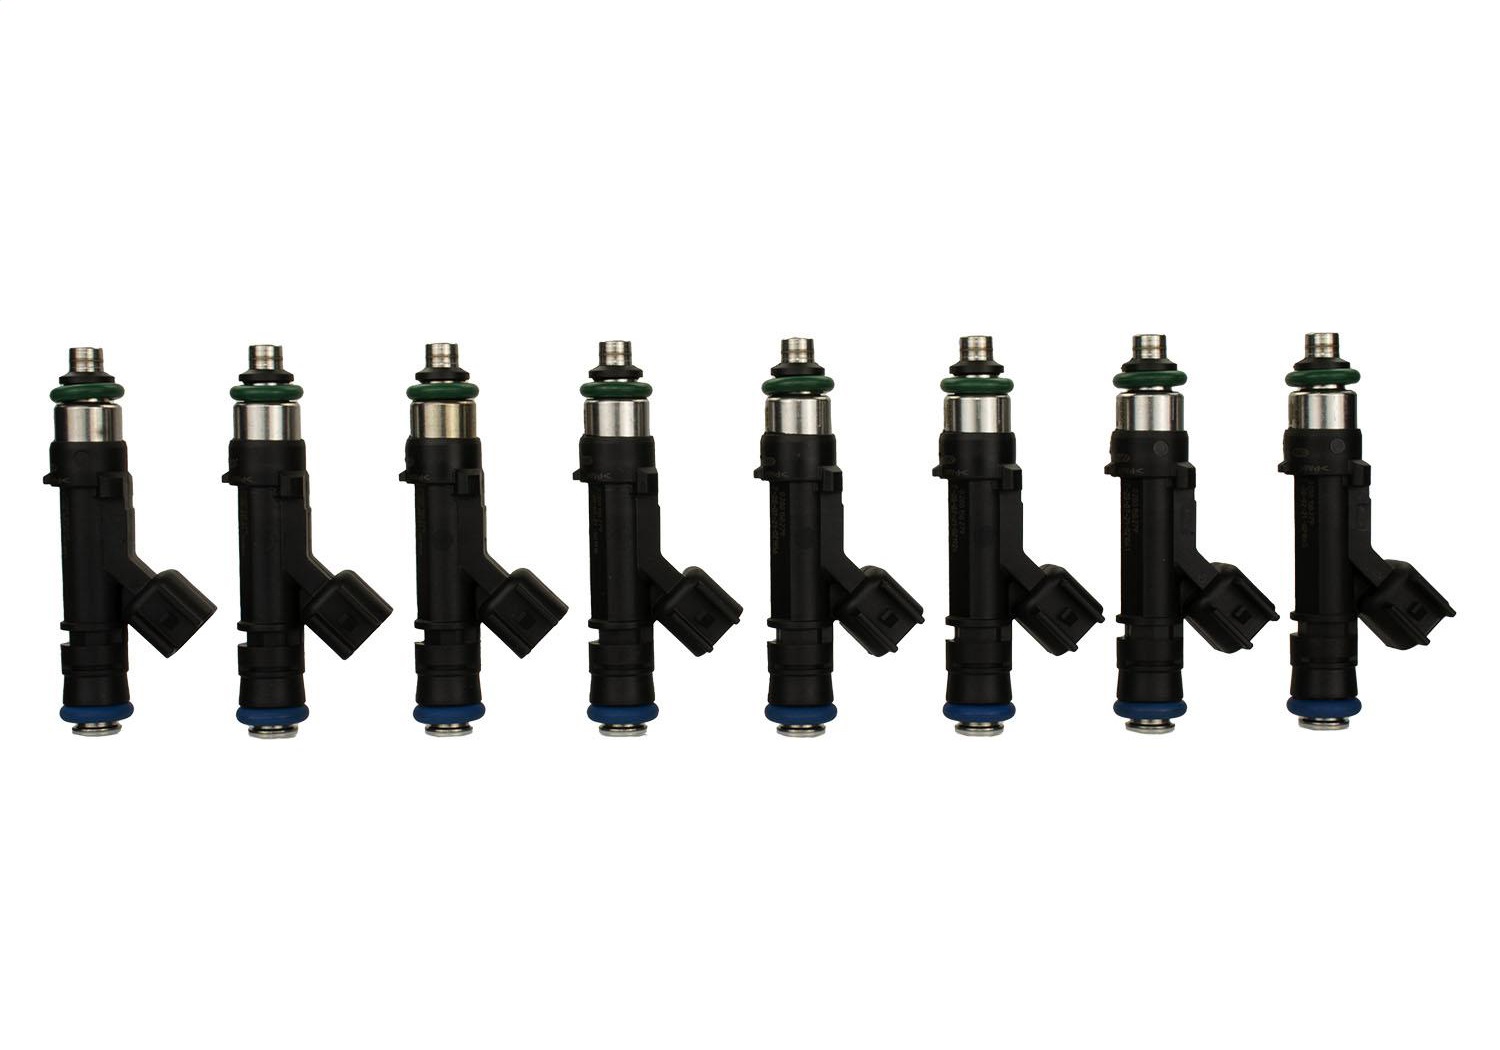 Ford Racing Ford Racing M-9593-LU47 Fuel Injector Set